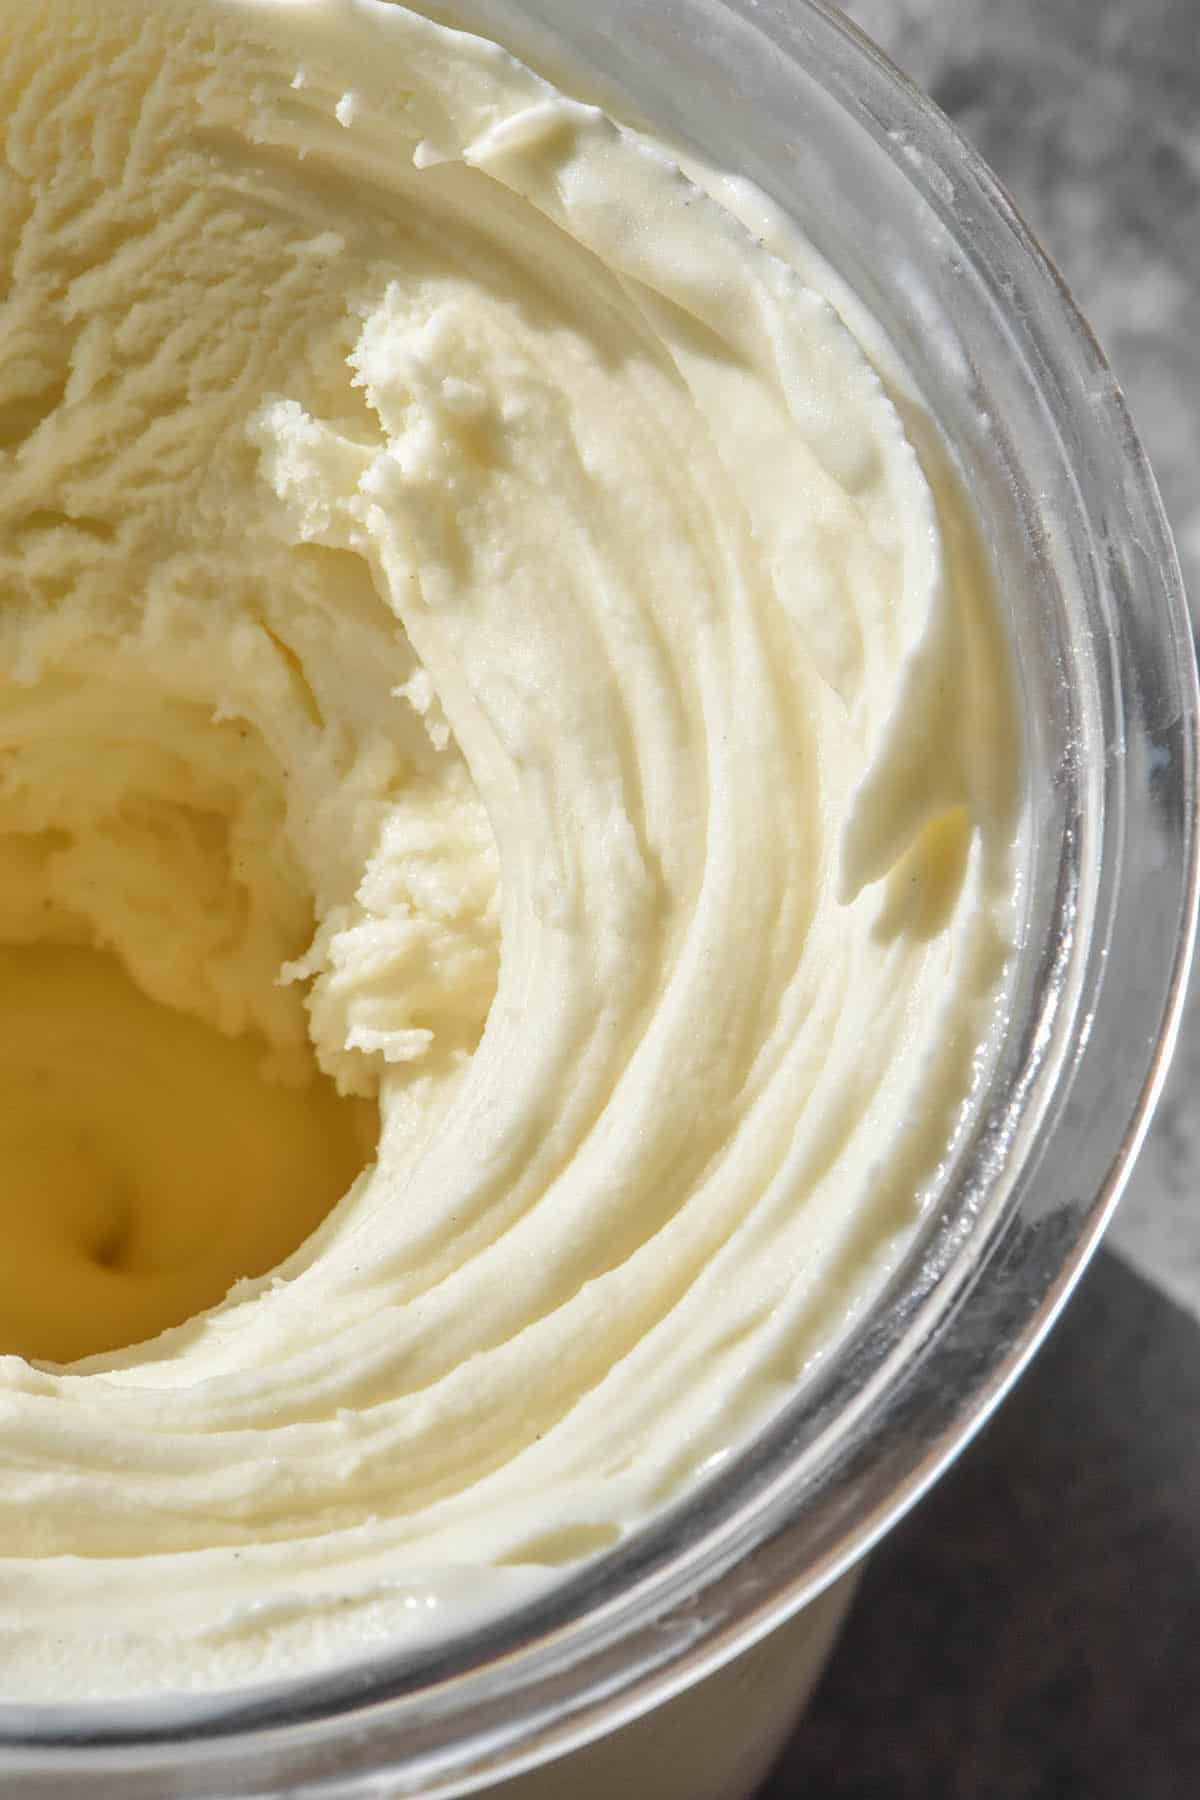 A sunlit close up image of Ninja Creami vanilla ice cream after it has been freshly spun in the machine